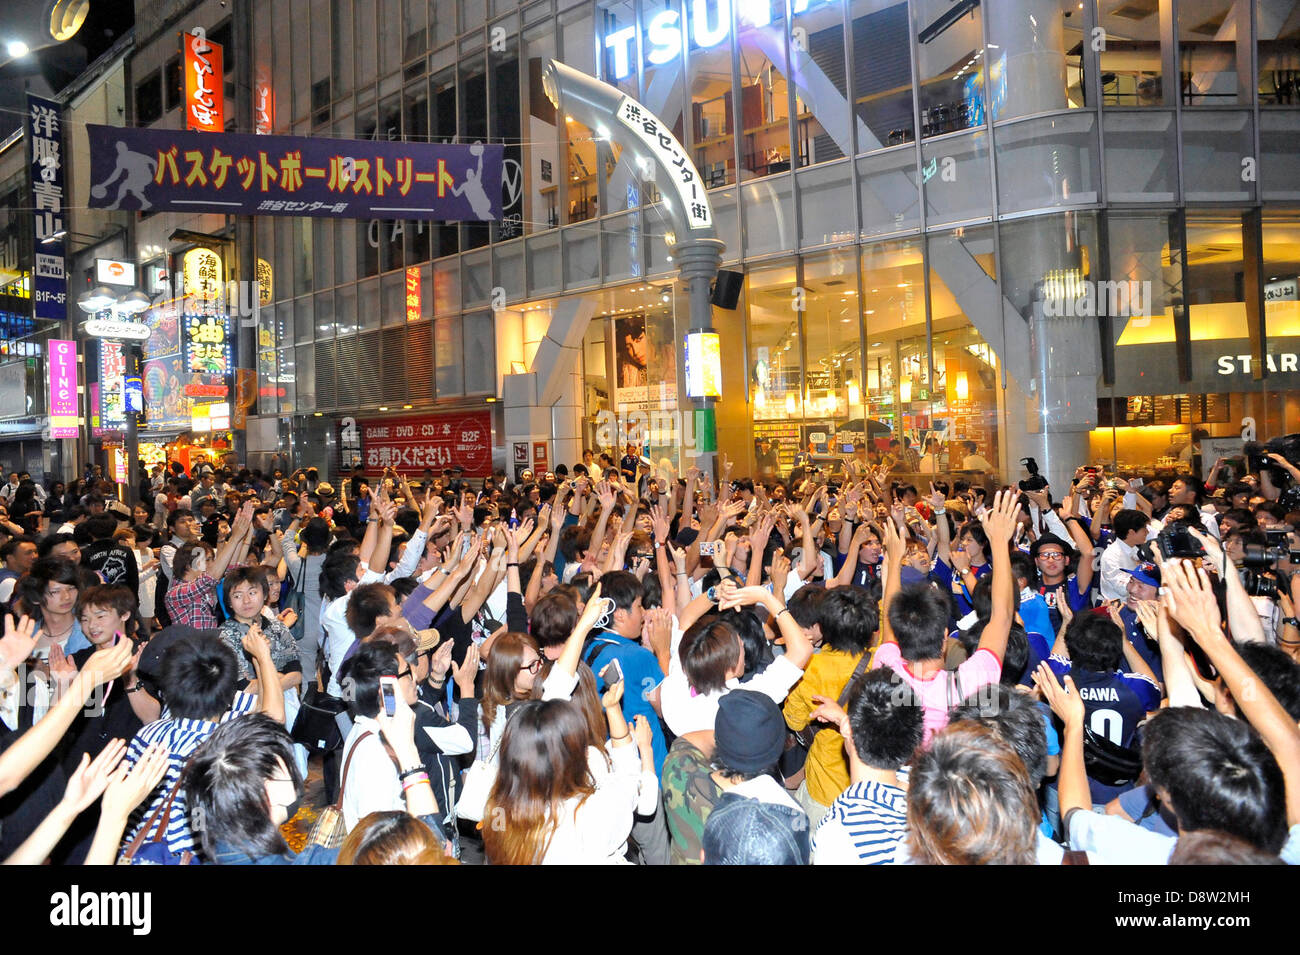 Saitama, Japan. 4th June 2013. June 4th, 2013 : Tokyo, Japan - Fans celebrated the Japan National Soccer team, which had a game of the final Asian qualifiers for the 2014 World Cup against Australia and cleared it, in front of Shibuya Station, Shibuya, Tokyo Japan on June 4, 2013.  (Photo by Koichiro Suzuki/AFLO/Alamy Live News) Stock Photo